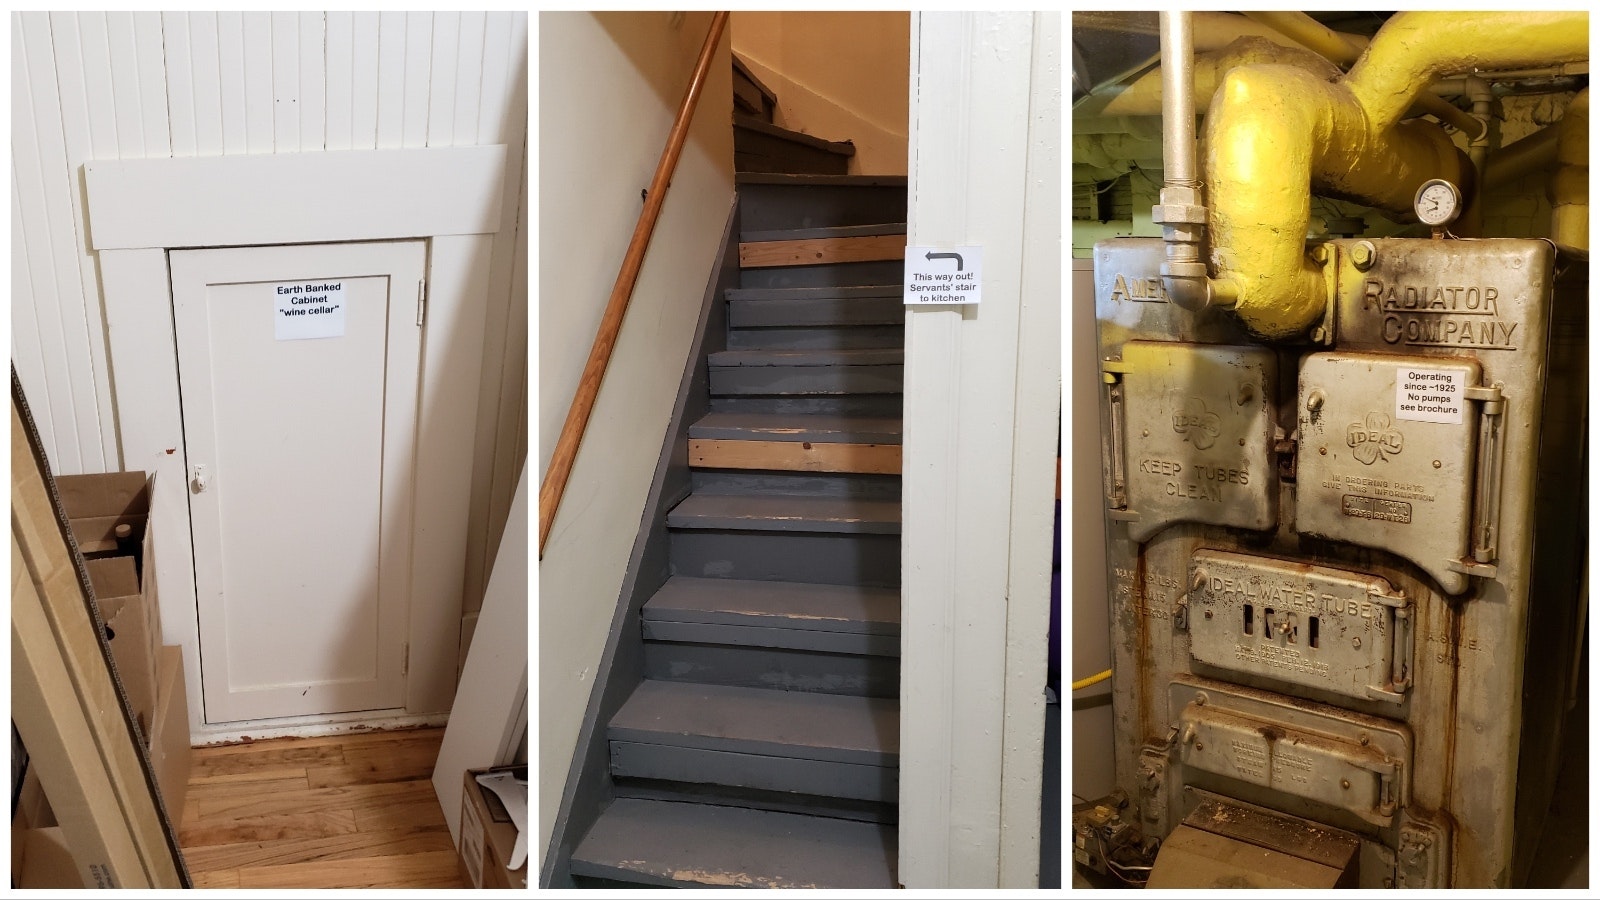 Laundry chute on the bedroom floor leads to the main floor, left; while signs for the steep basement stairway help guide people around the house, center; the old boiler is still in the basement, right.